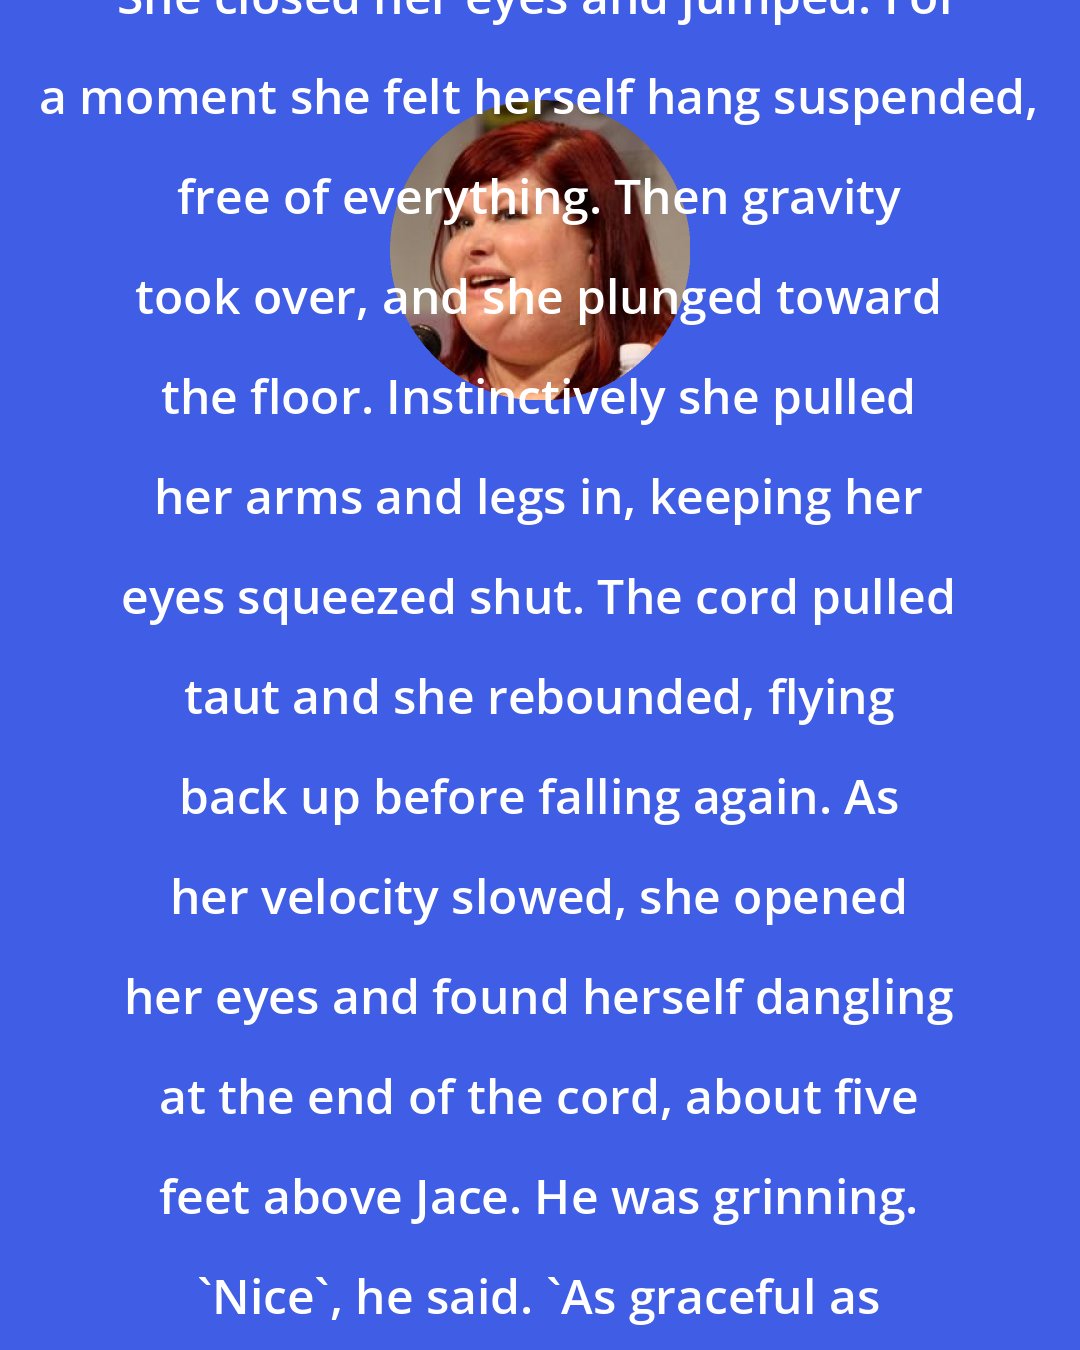 Cassandra Clare: She closed her eyes and jumped. For a moment she felt herself hang suspended, free of everything. Then gravity took over, and she plunged toward the floor. Instinctively she pulled her arms and legs in, keeping her eyes squeezed shut. The cord pulled taut and she rebounded, flying back up before falling again. As her velocity slowed, she opened her eyes and found herself dangling at the end of the cord, about five feet above Jace. He was grinning. 'Nice', he said. 'As graceful as a falling snowflake.